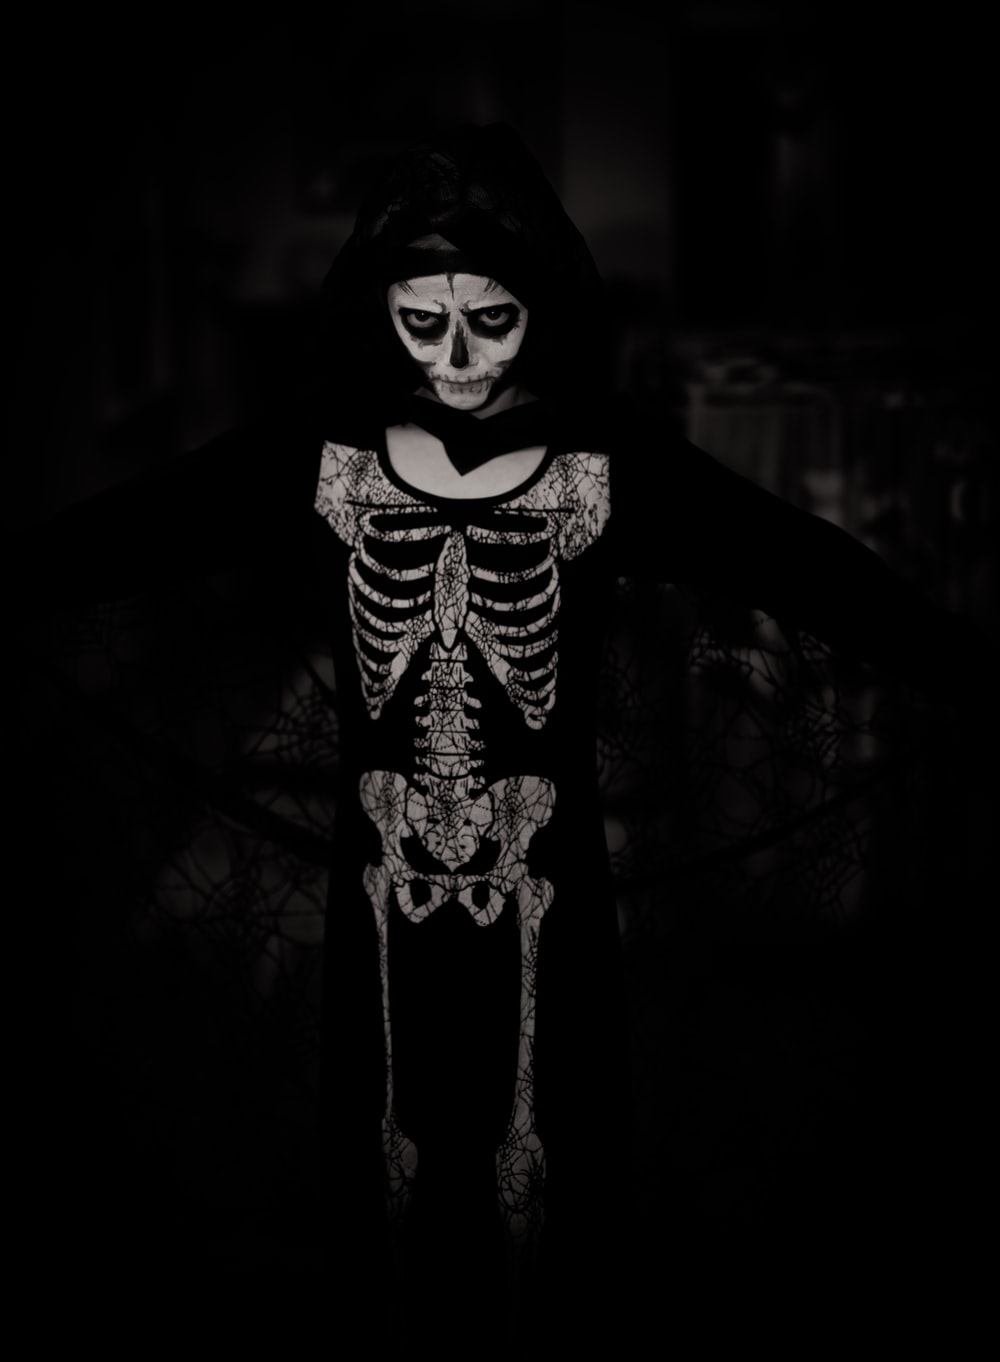 Skeletons Picture. Download Free Image